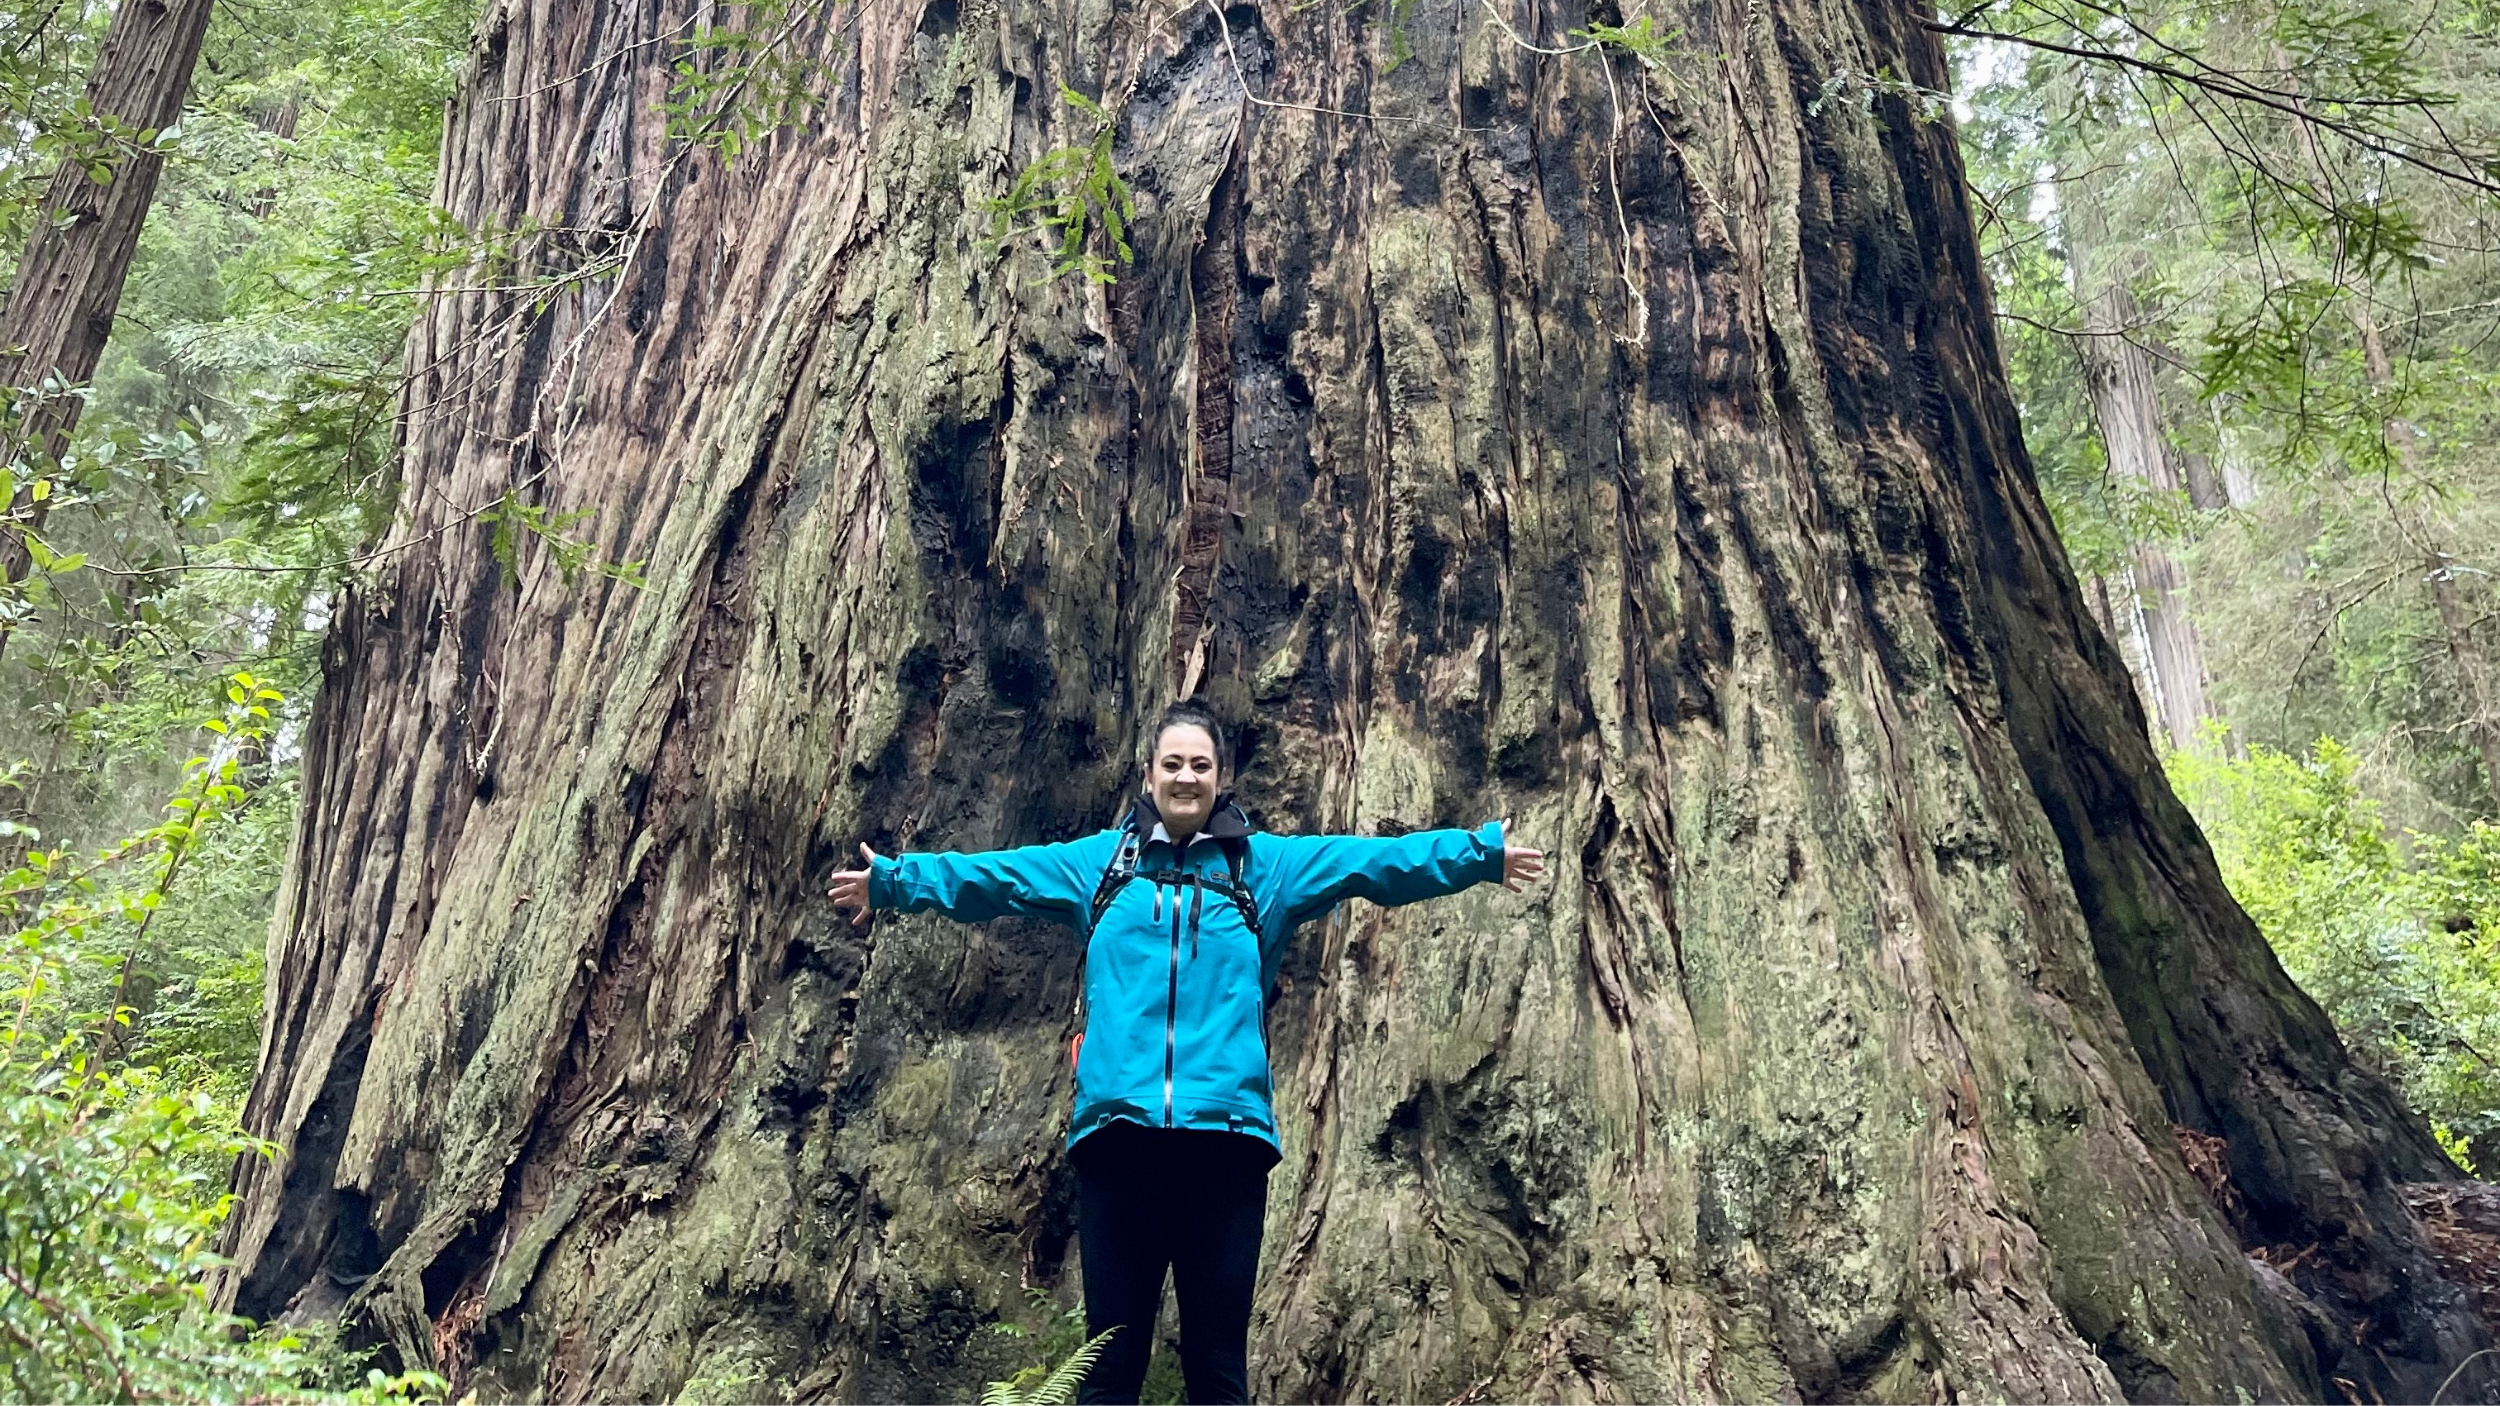 Nikki standing with her arms wide open in front of a large tree in the Redwood Forest